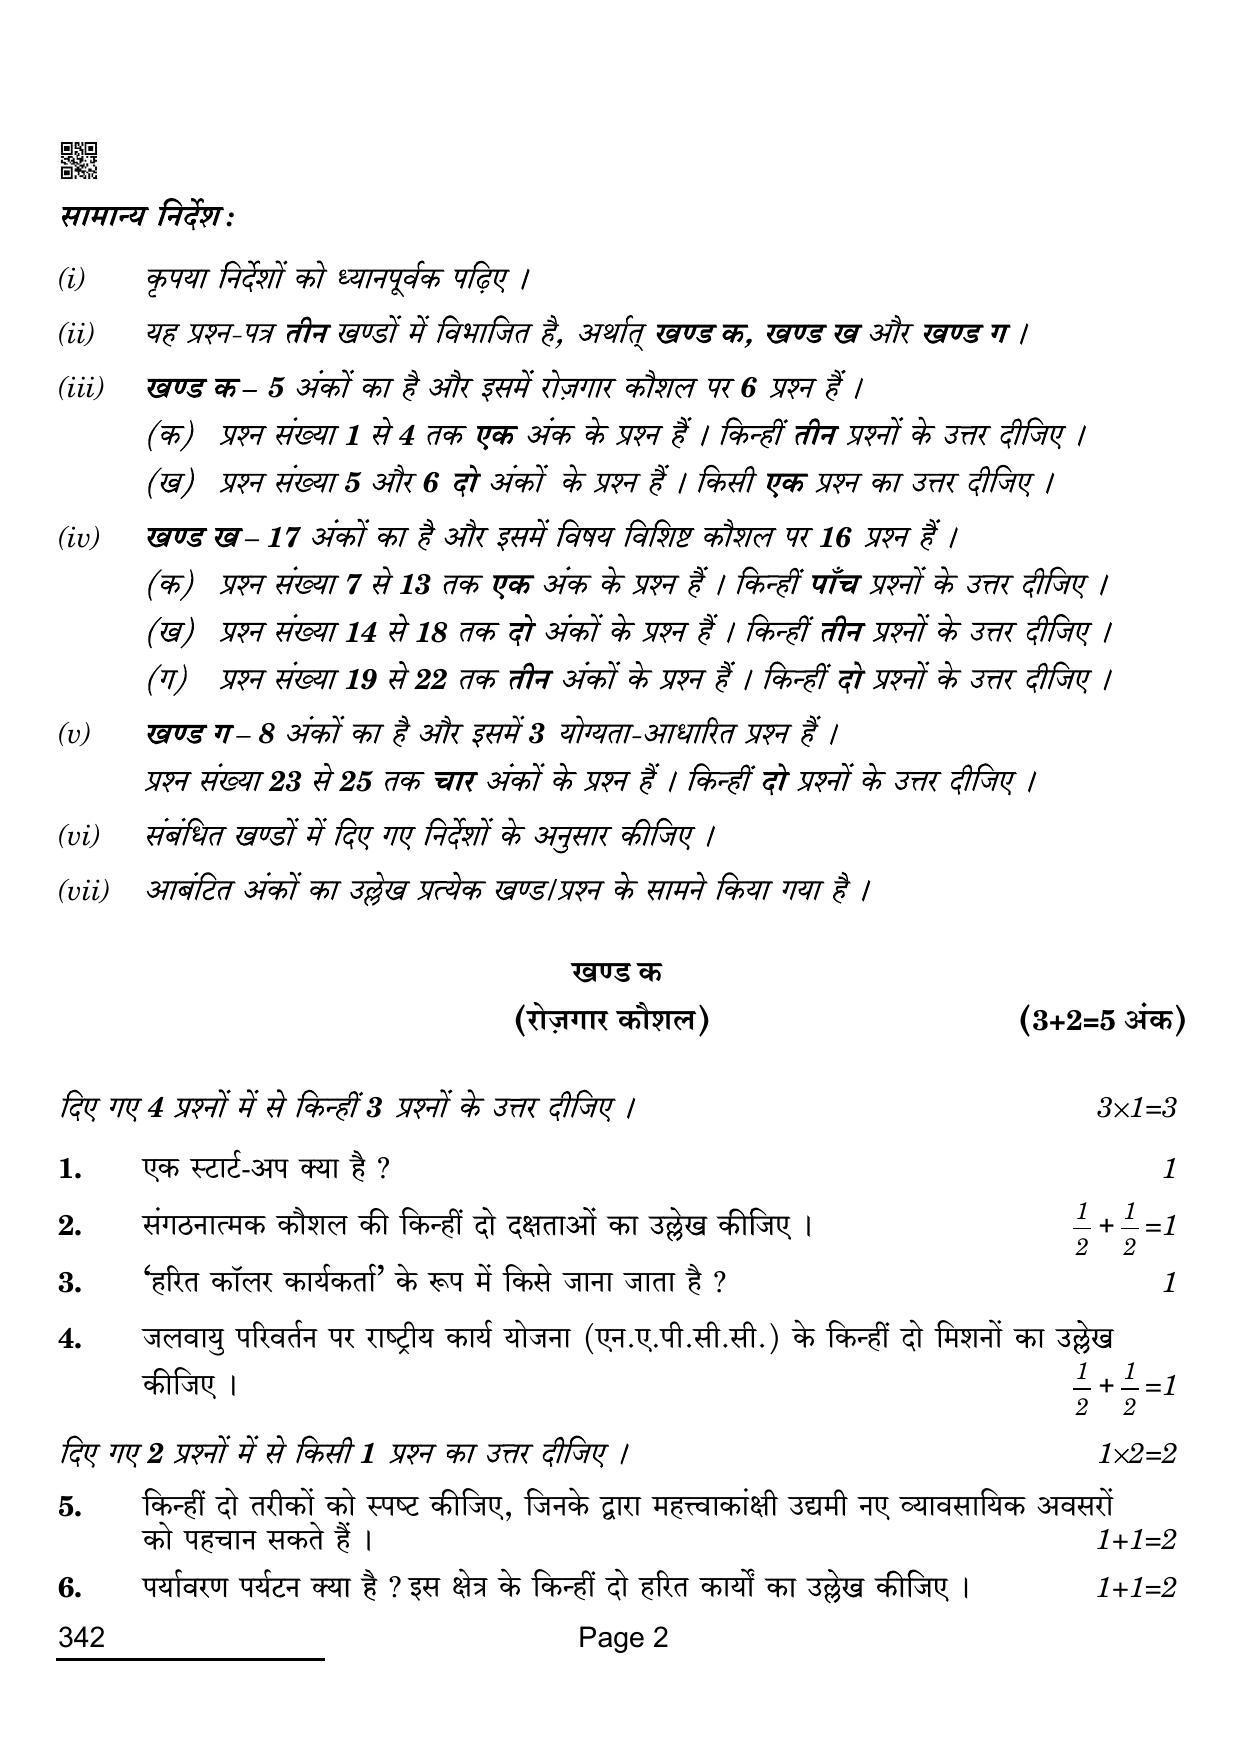 CBSE Class 12 342_Geospatial Technology 2022 Question Paper - Page 2